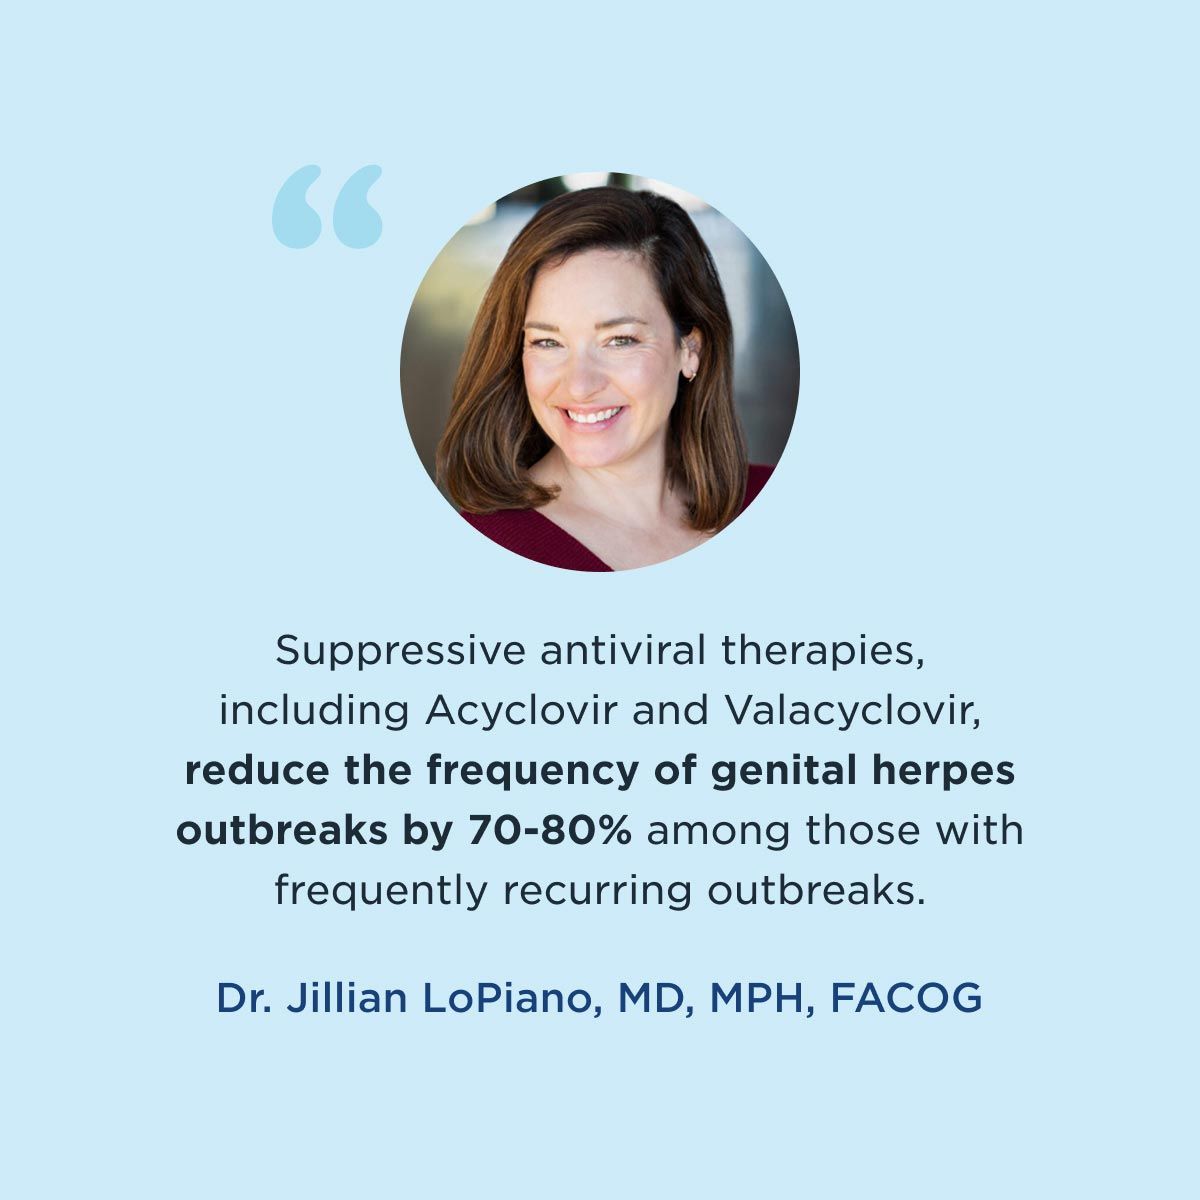 A medial provider quote about Herpes treatment from Dr. Jillian Lopiano, MD